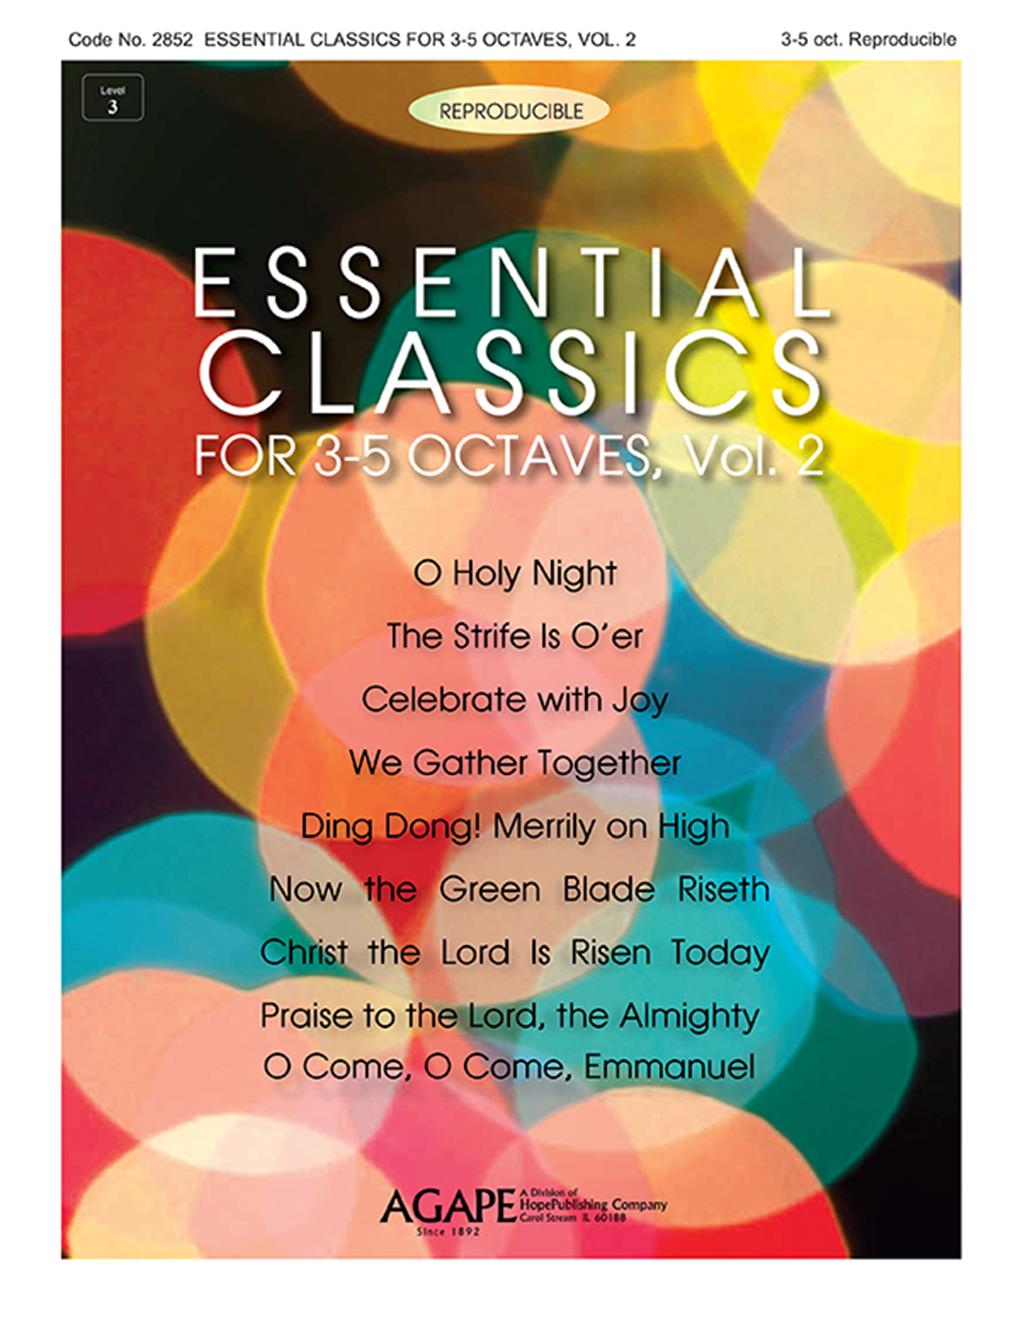 Essential Classics for 3-5 Octaves Vol. 2 (Reproducible) Cover Image